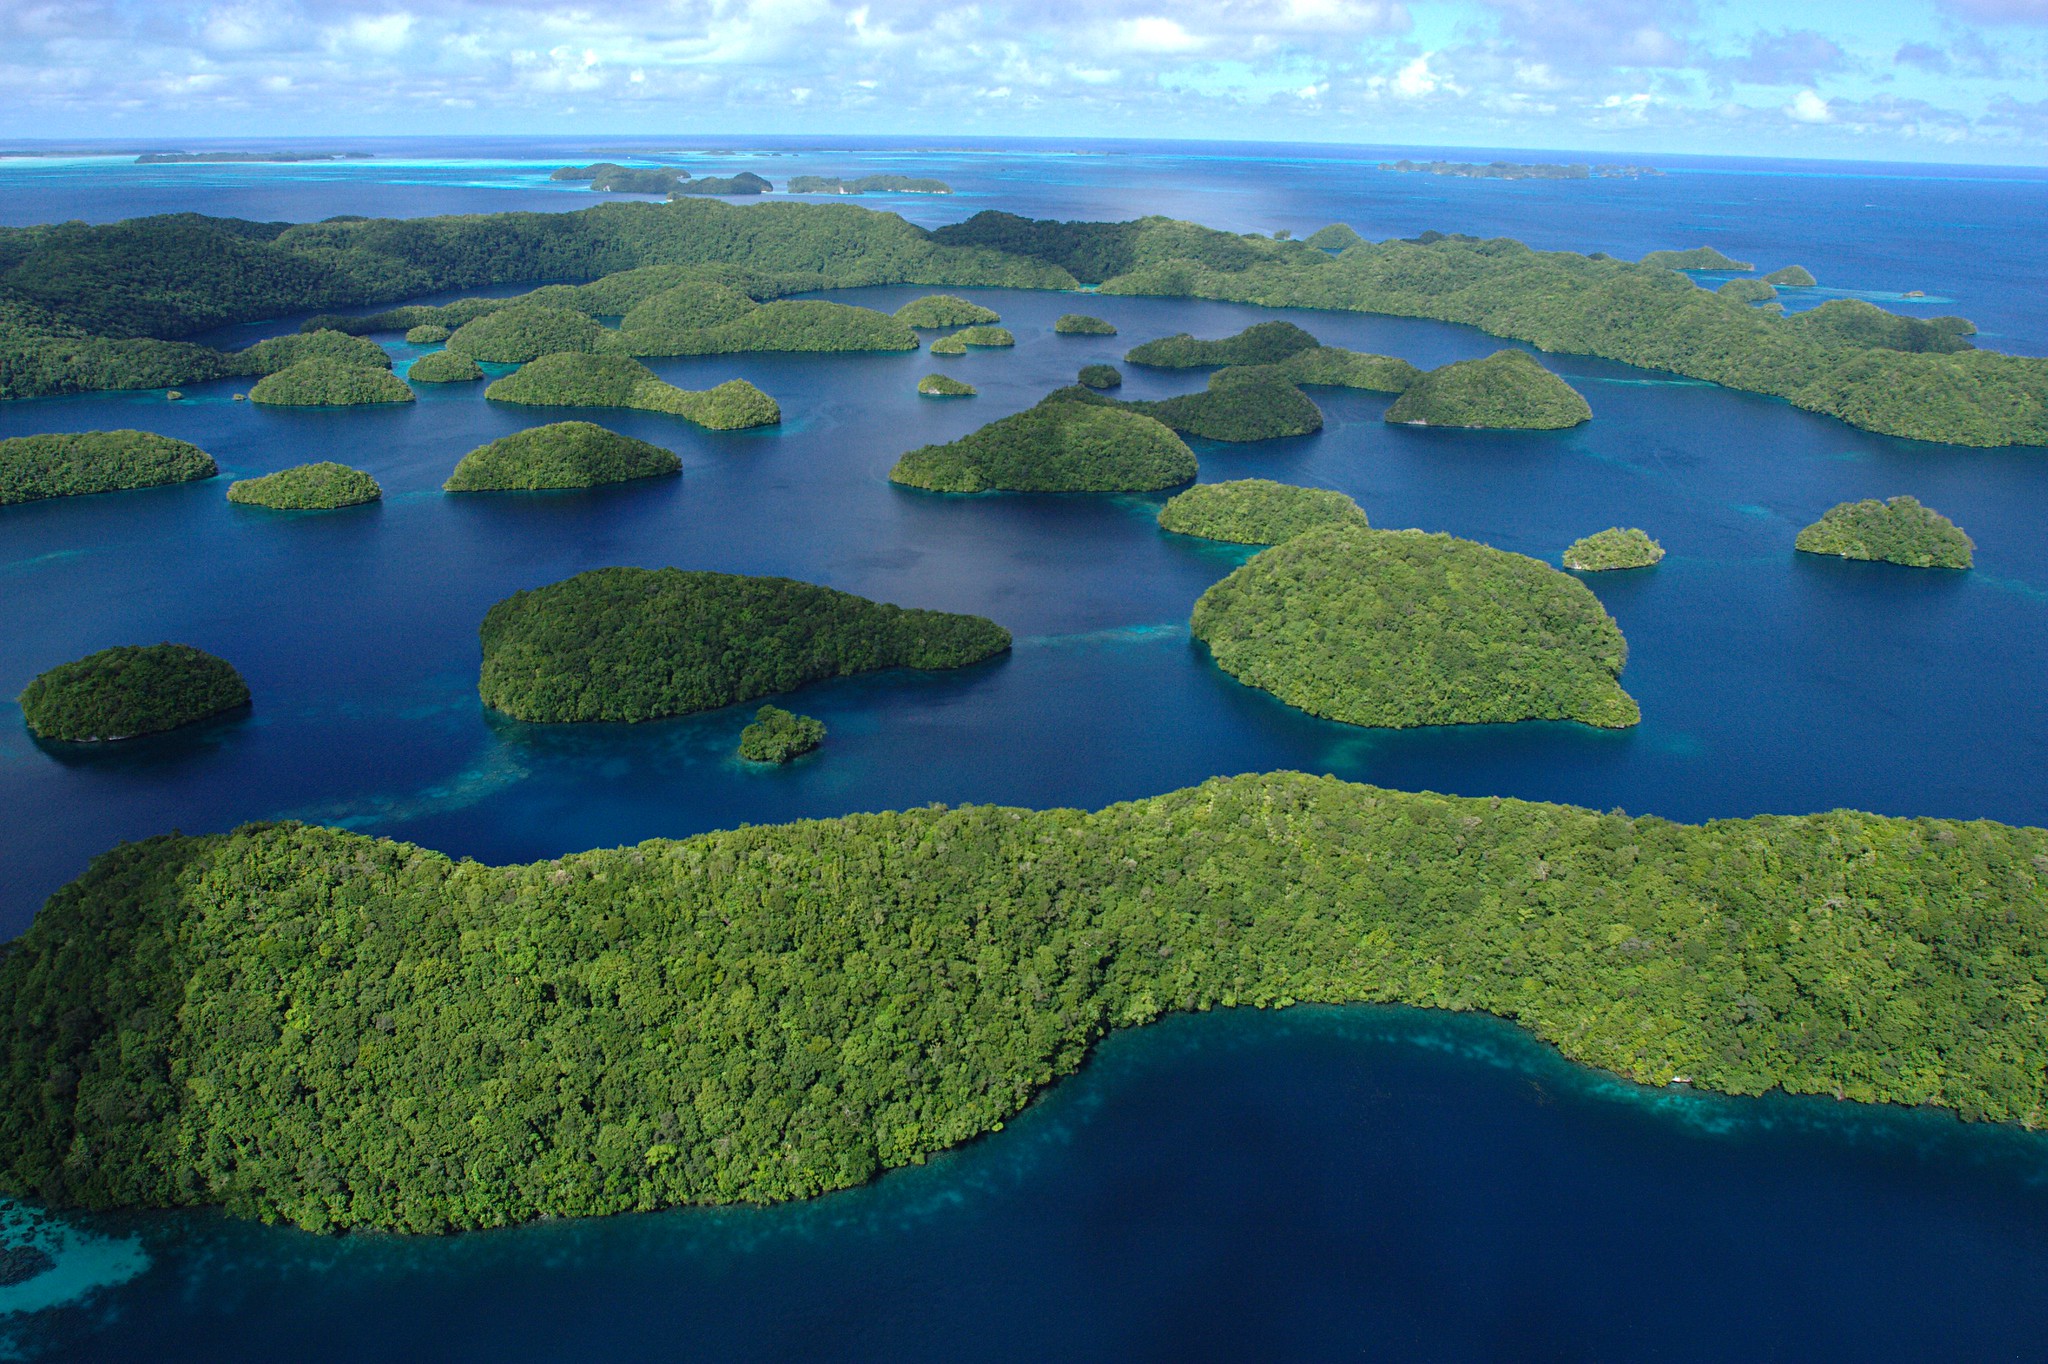 Aerial photo of an archipelago of small, plant-covered islands in a deep blue ocean.